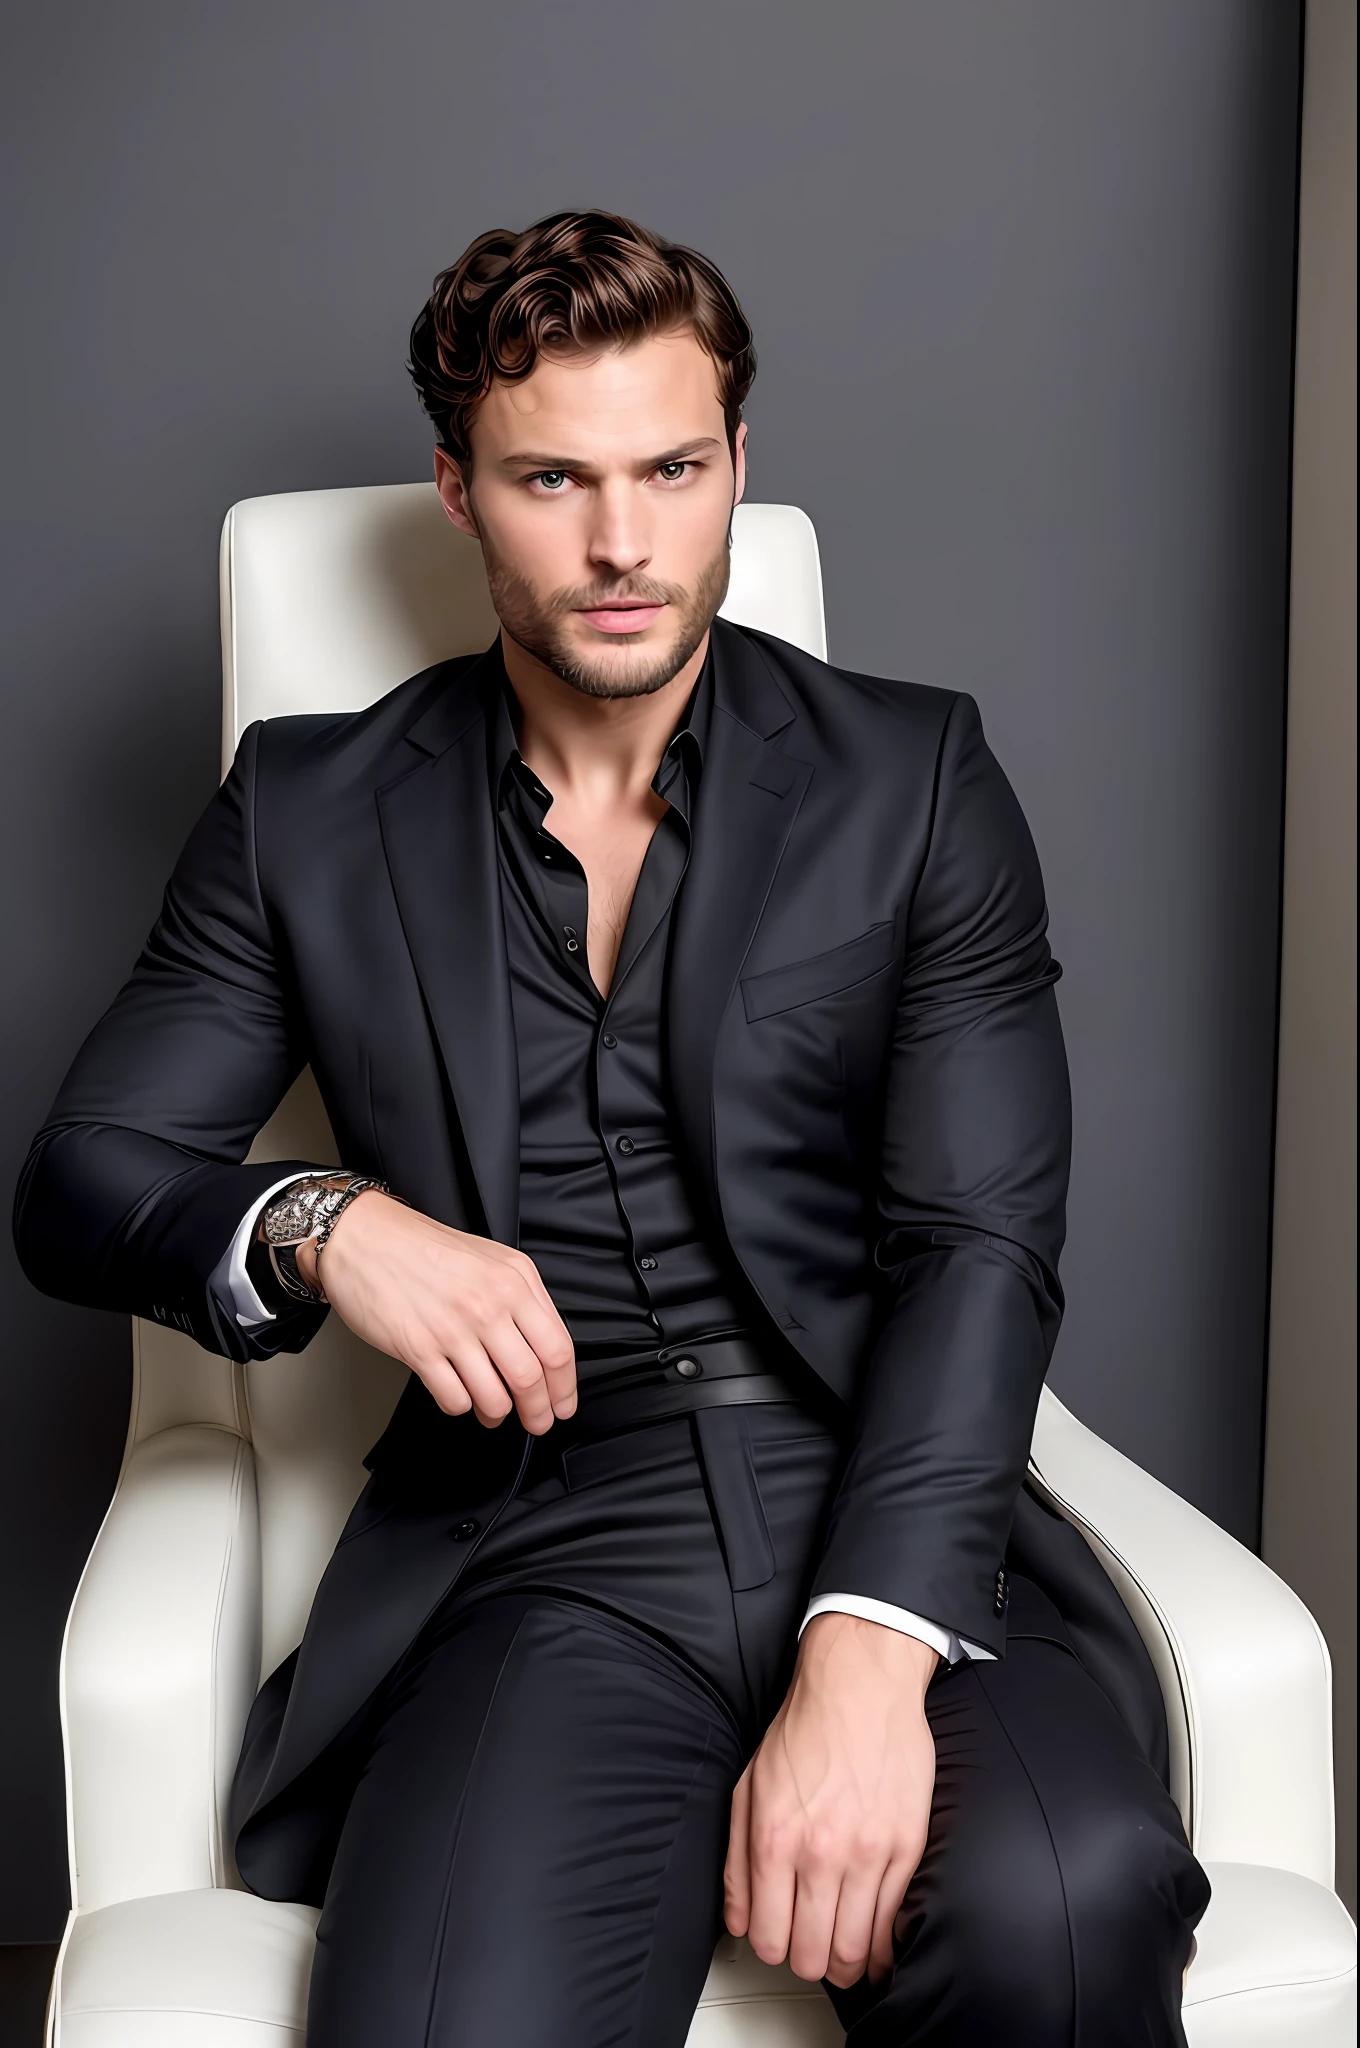 ((half body)) Photo RAW Ceo man sitting in an office chair, wearing black suit, (Using dark beard) movie scene, (Impeccable) ,Serious and elegant man, Actor Jamie Dornan, with thick male eyebrows, secret agent 007 man style, (with mysterious and serious face,) short dark hair, dark black background image,elegant and elegant, Man similar to actor Jamie Dornan,  ( high quality and realistic image), ((Best Quality, 8k, Masterpiece).